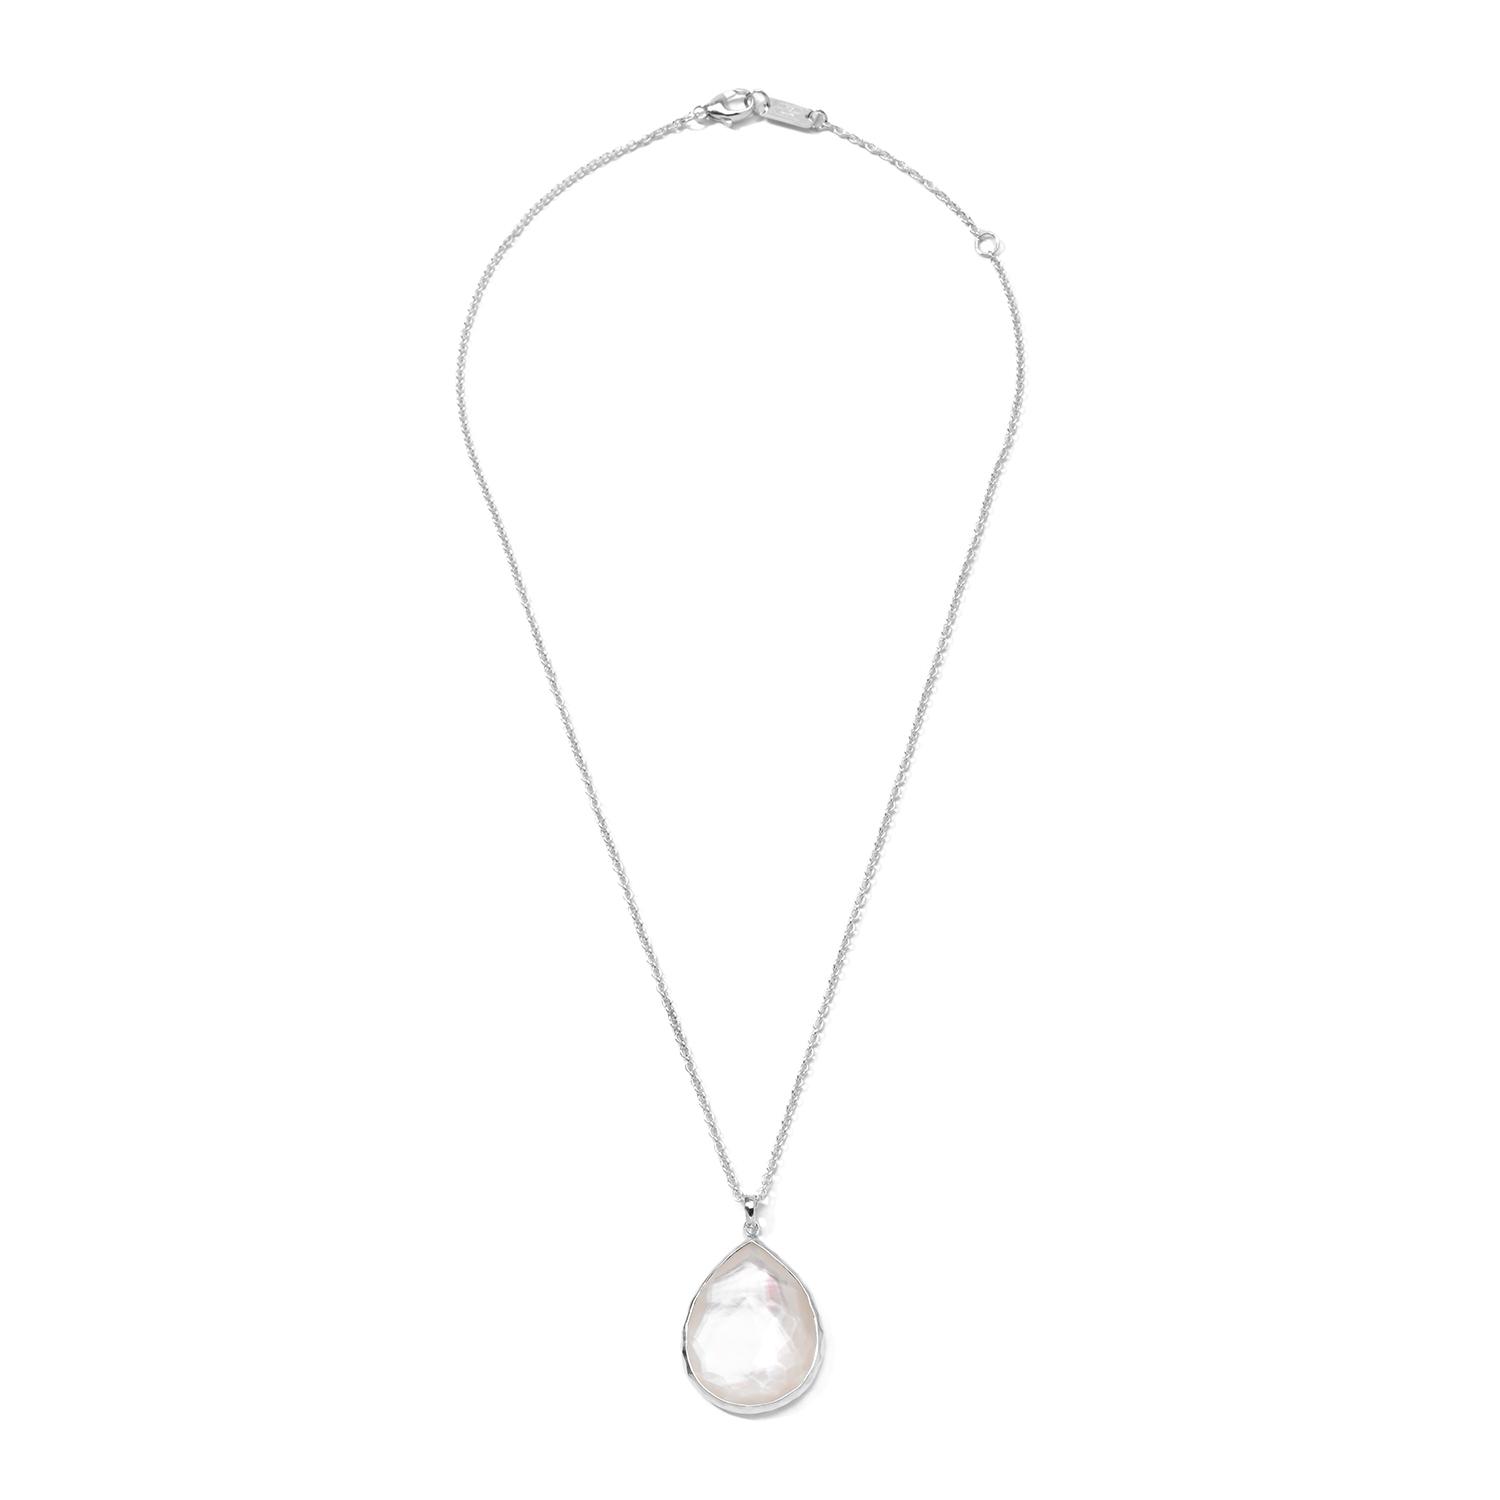 Ippolita Large Sterling Silver & Mother Of Pearl Teardrop Pendant Necklace